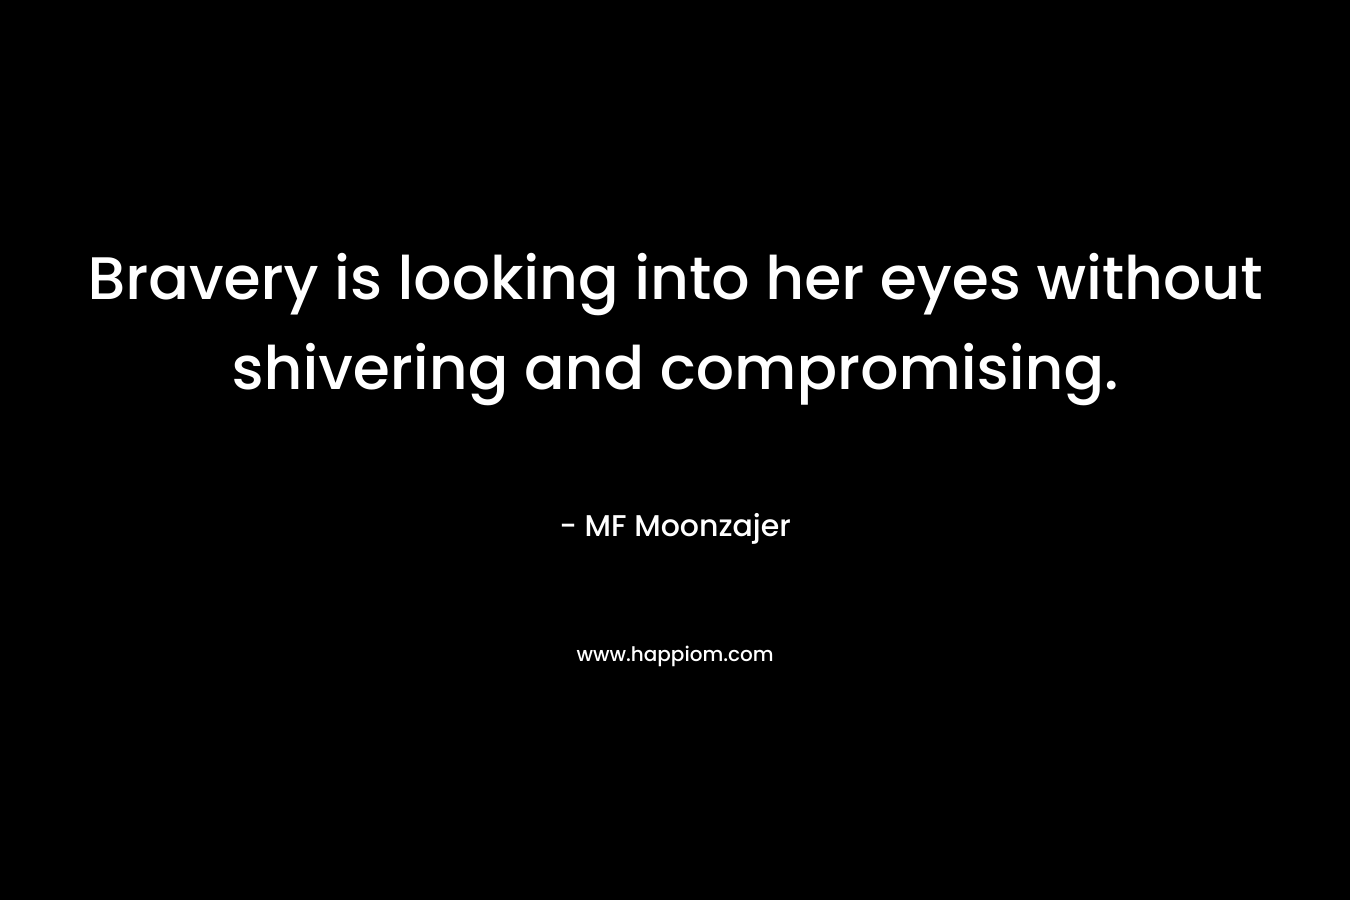 Bravery is looking into her eyes without shivering and compromising. – MF Moonzajer